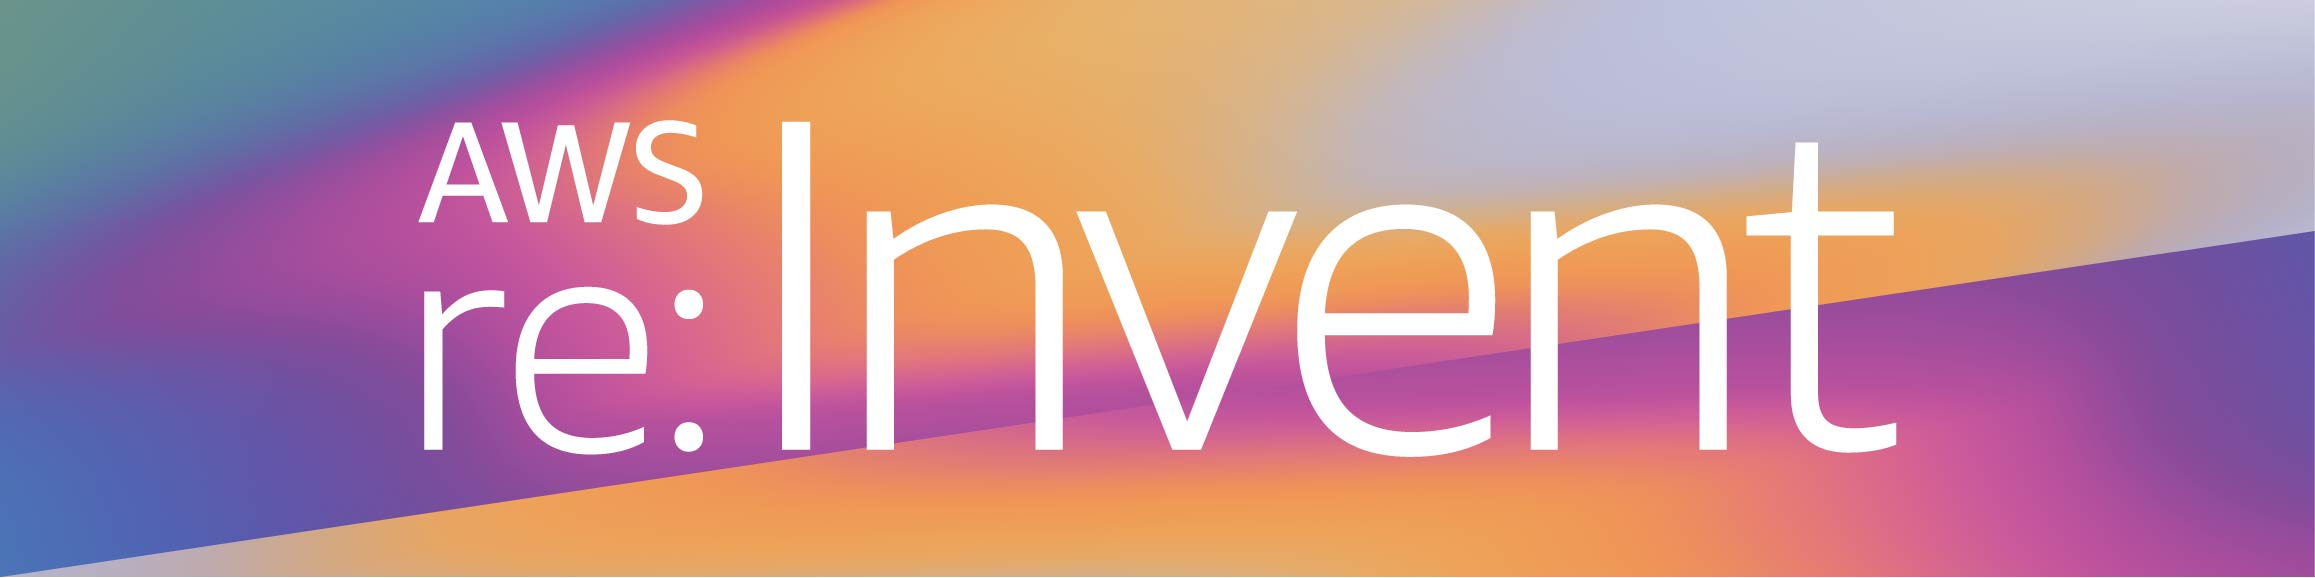 Can’t-miss Serverless Sessions for re:Invent 2019